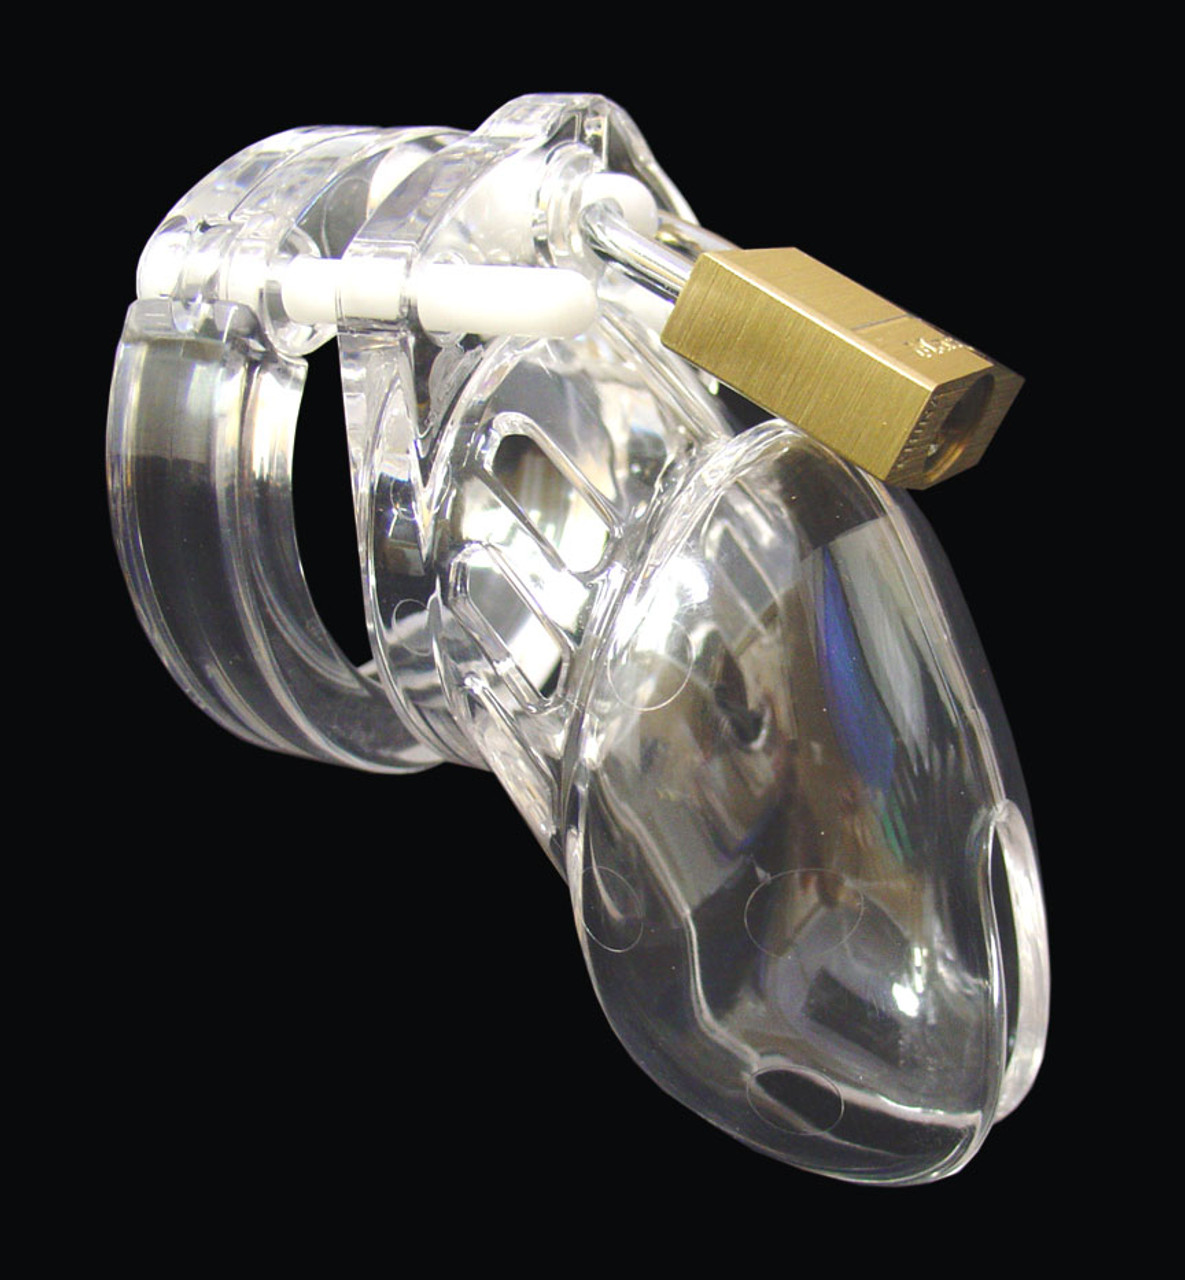 CB-6000S Chastity Cock Cage Kit